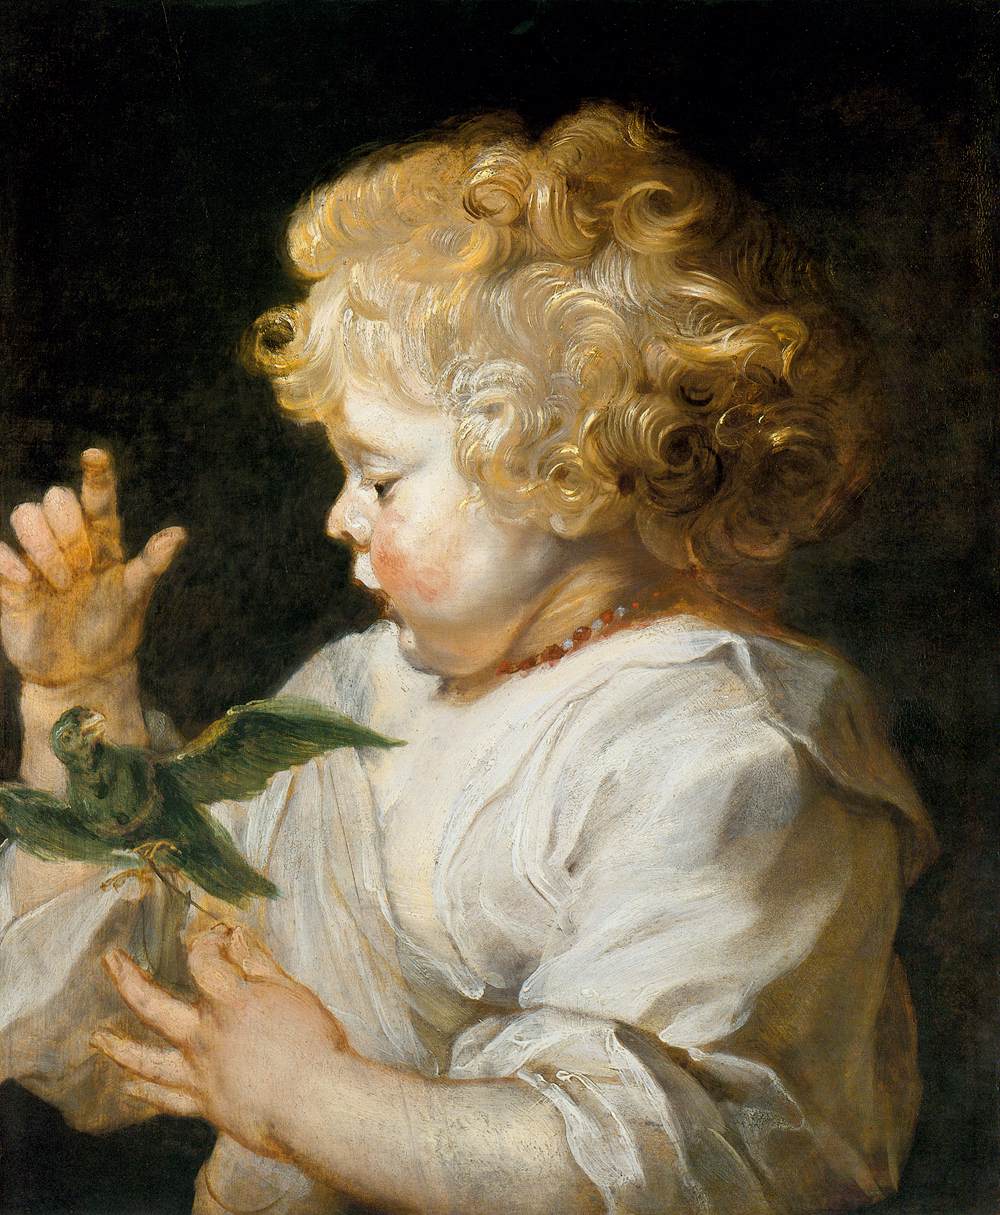 Boy with Bird by Peter Paul Rubens Reproduction Oil Painting on Canvas